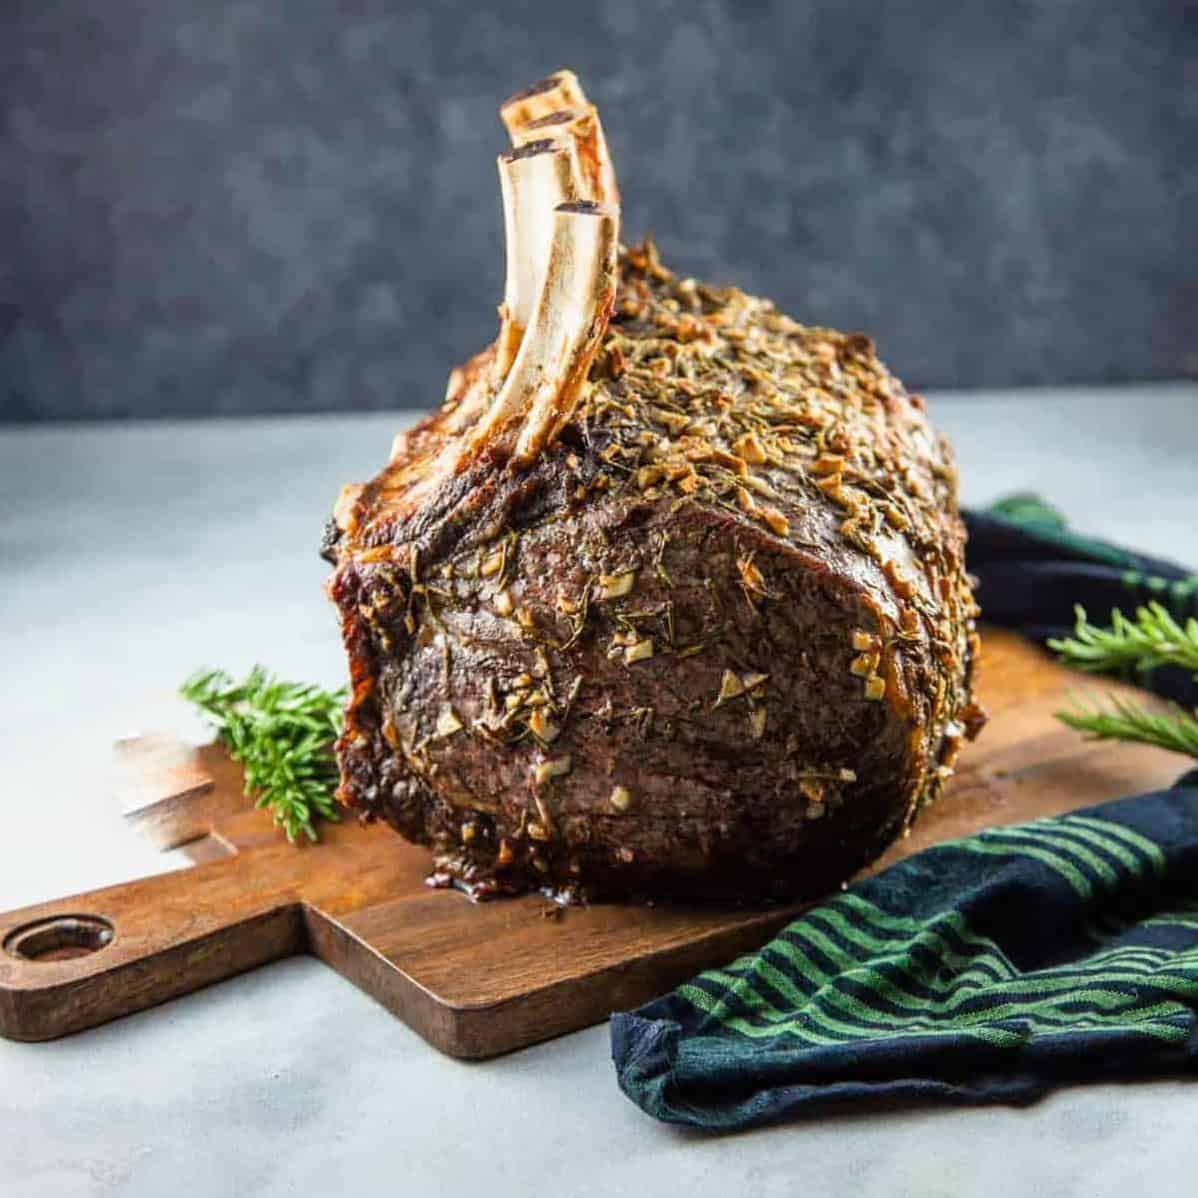  A generous amount of herbs and spices is what elevates this roast to a new level.